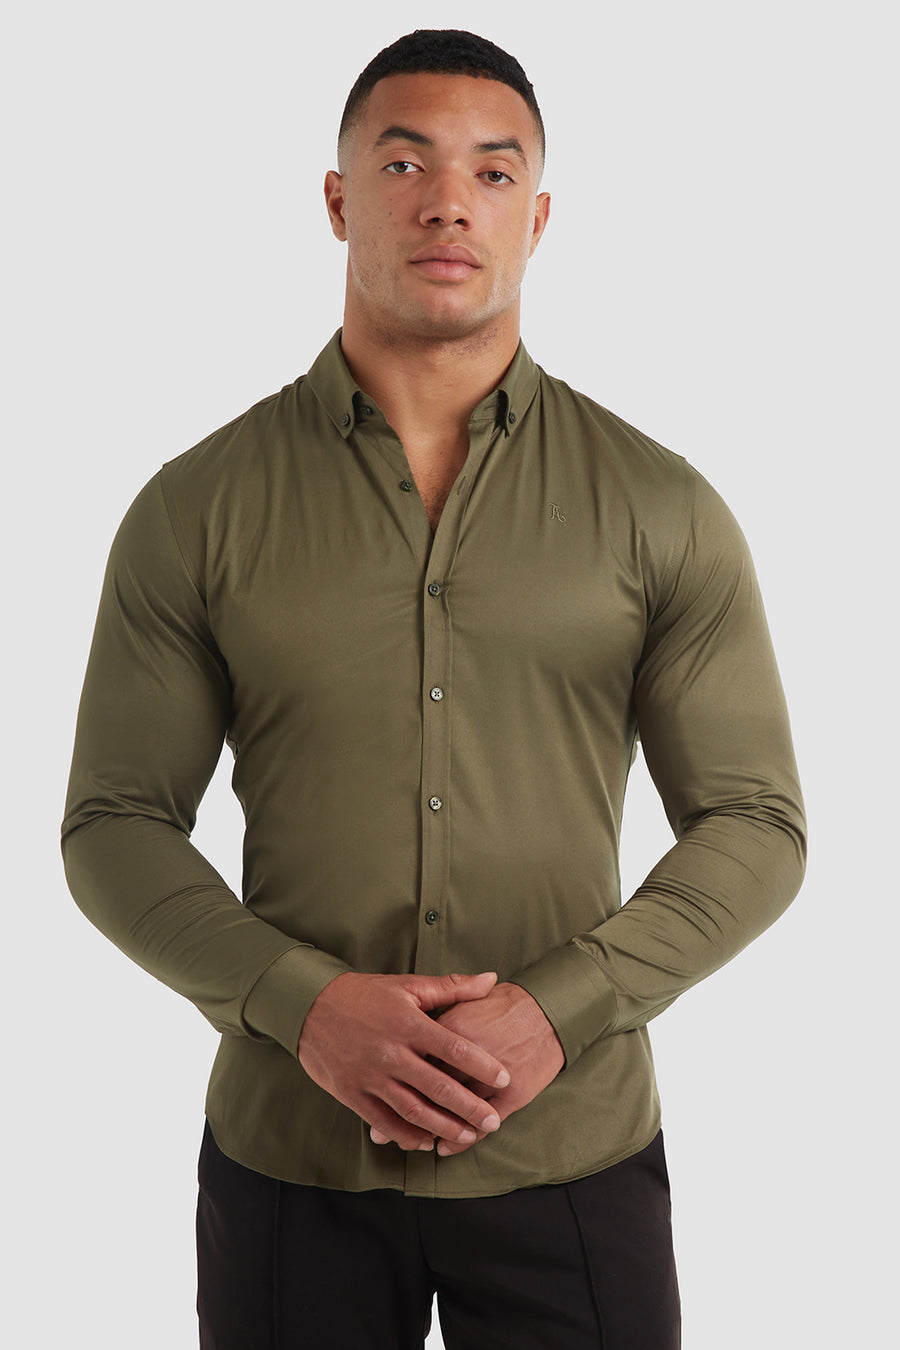 Athletic Fit Signature Shirt in Olive - TAILORED ATHLETE - USA